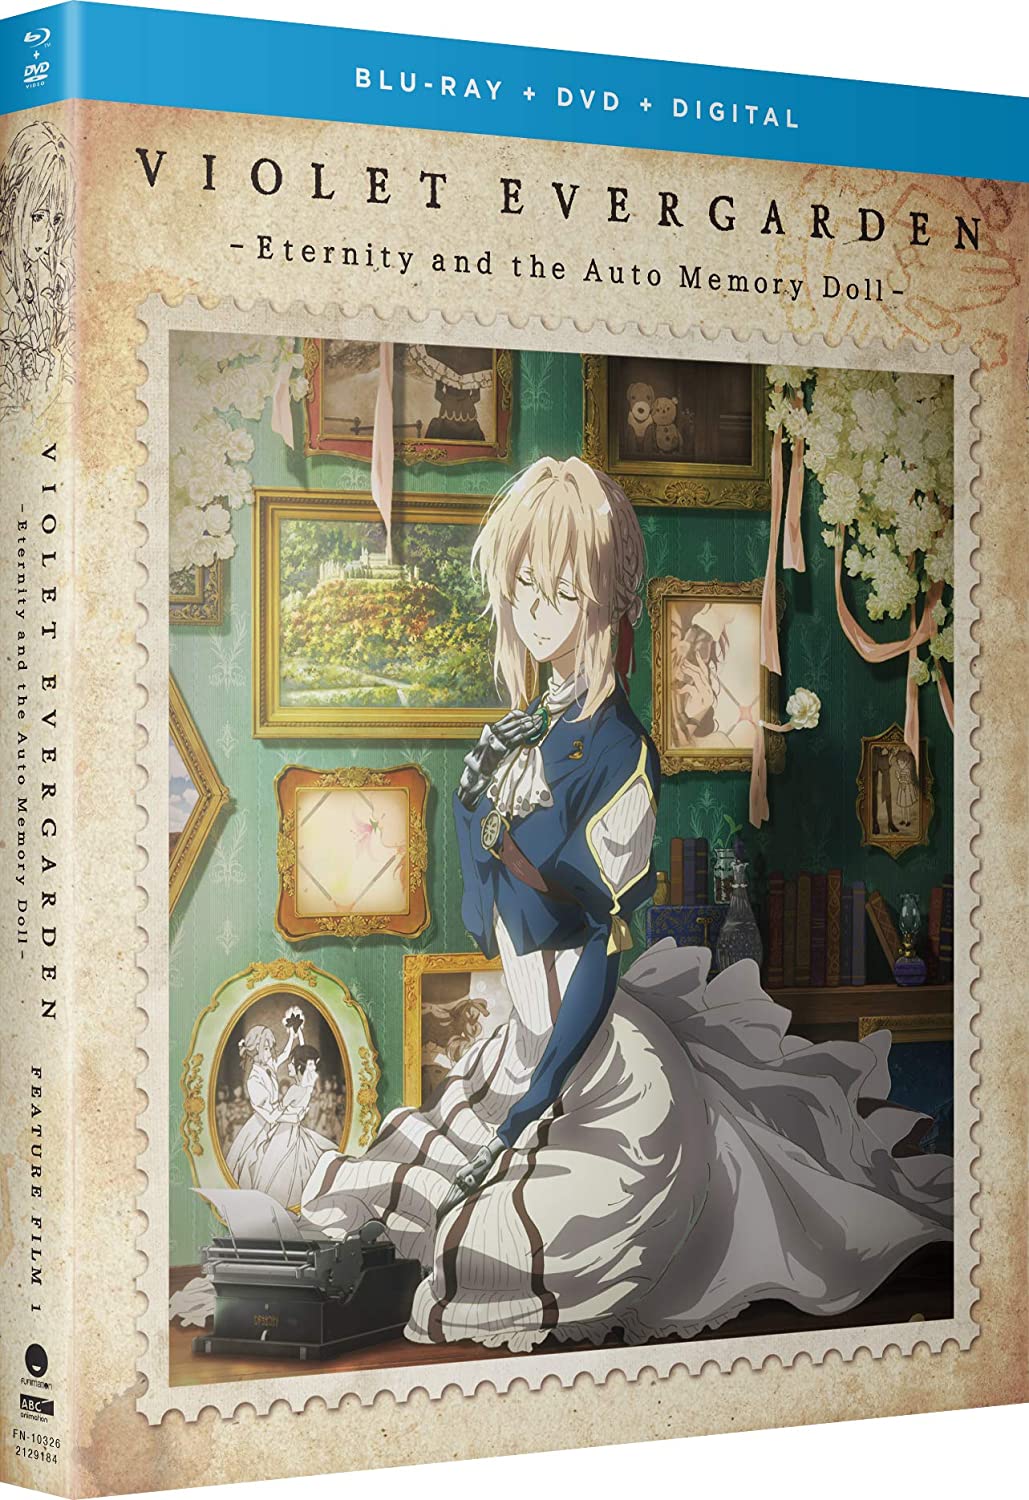 Violet Evergarden: Eternity and the Auto-Memory Doll